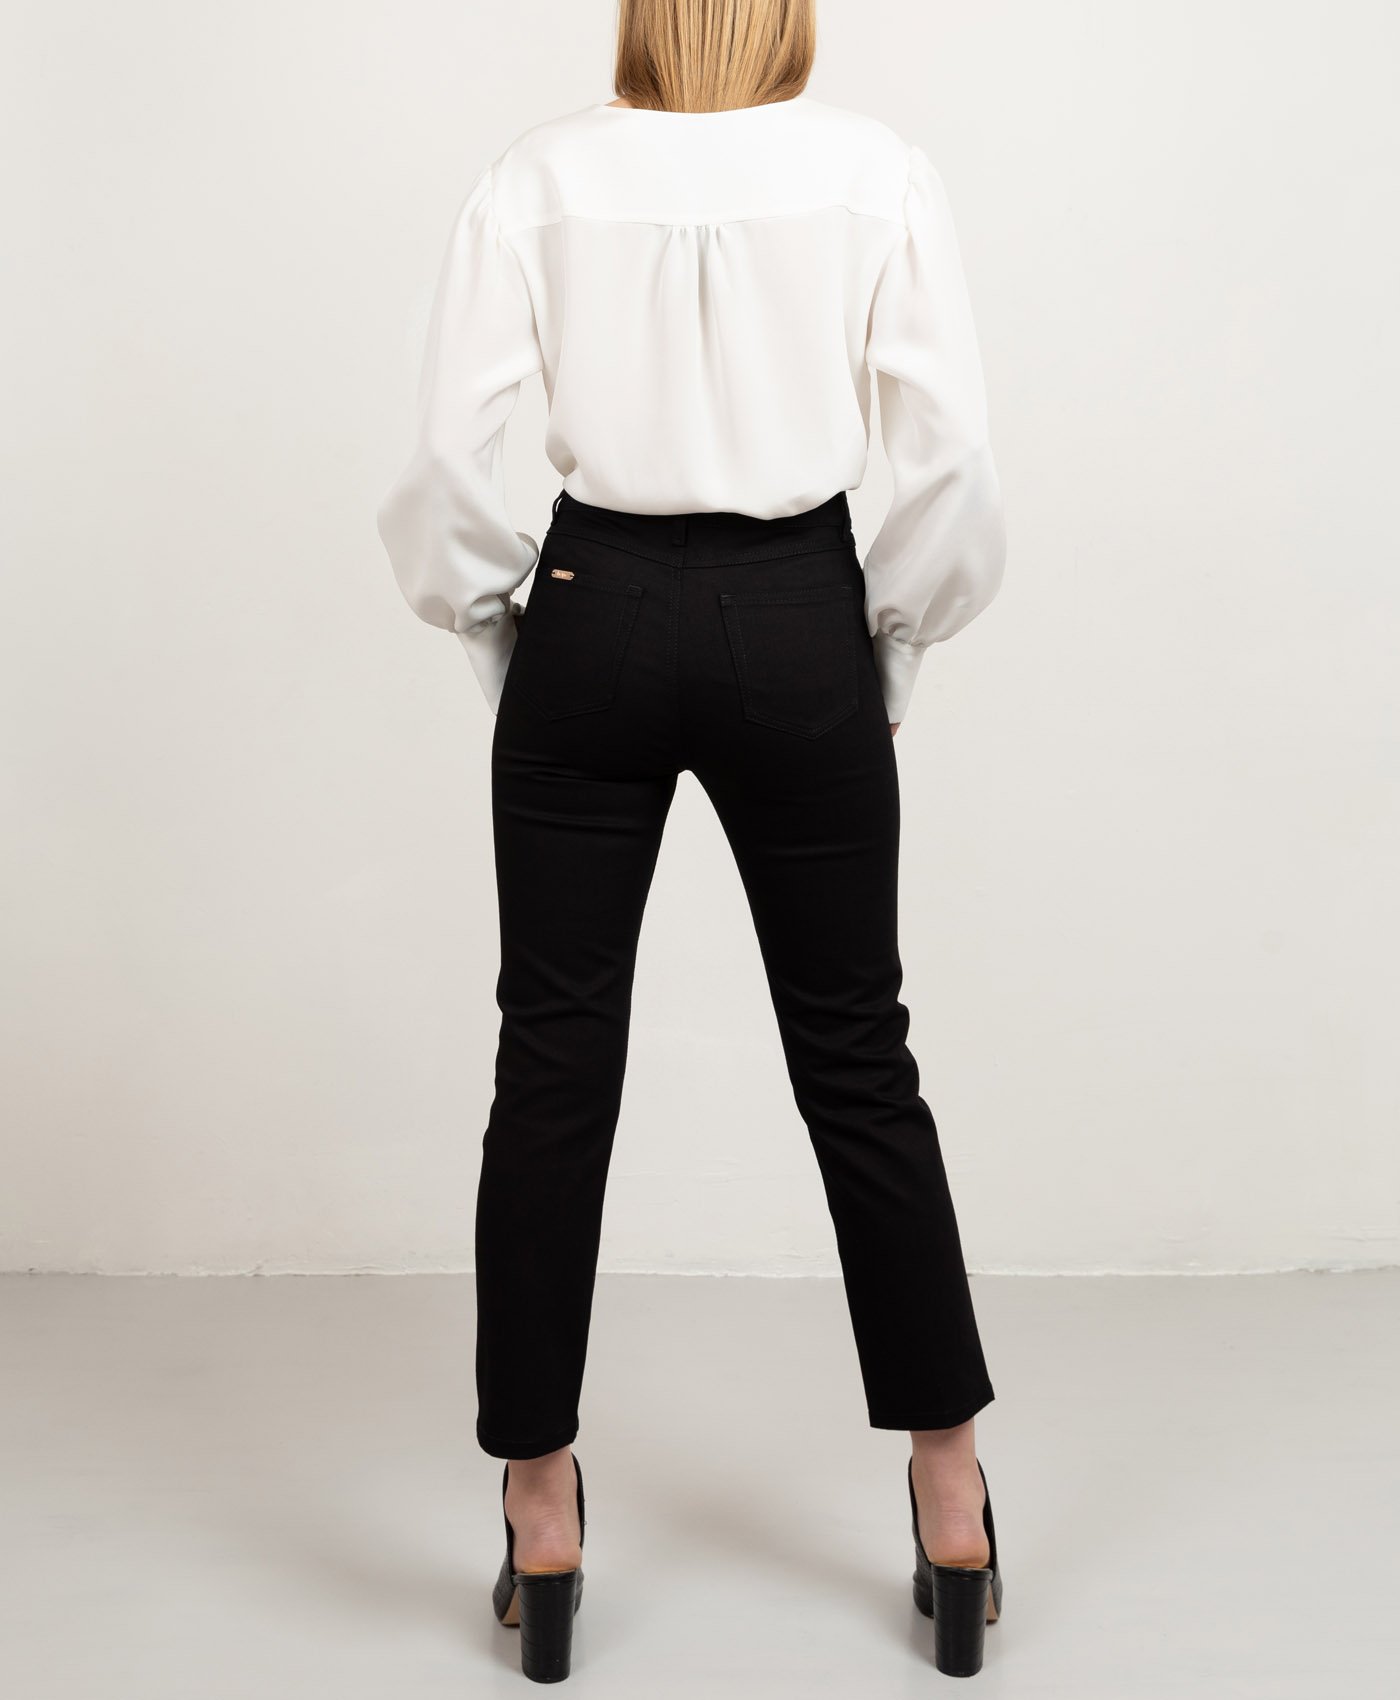 Custom fit cropped jeans in black with matching stitches by Studio Heijne